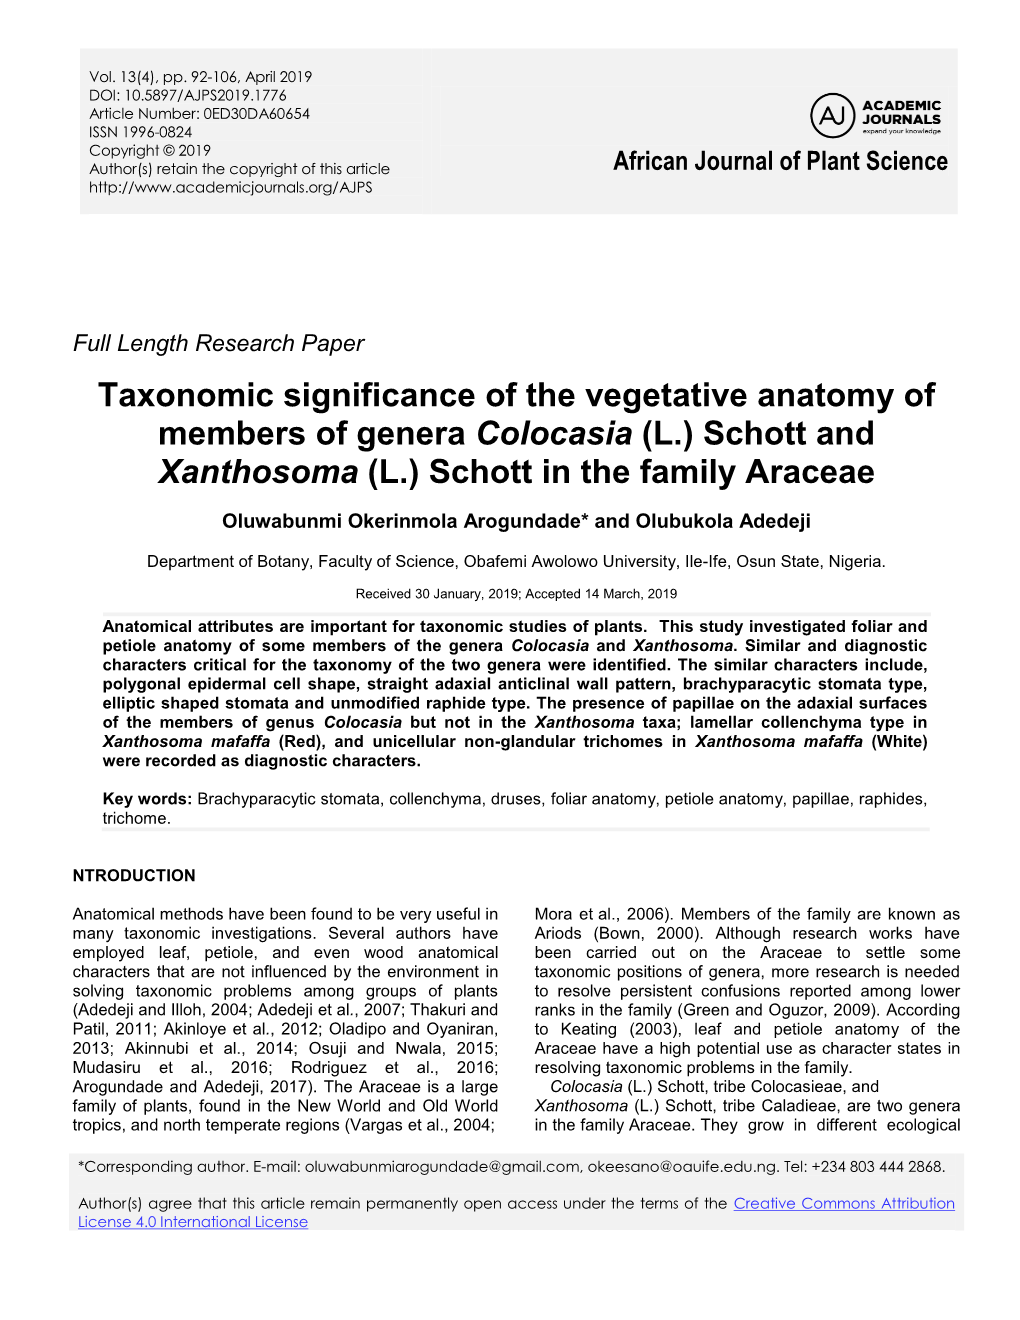 Taxonomic Significance of the Vegetative Anatomy of Members of Genera Colocasia (L.) Schott and Xanthosoma (L.) Schott in the Family Araceae